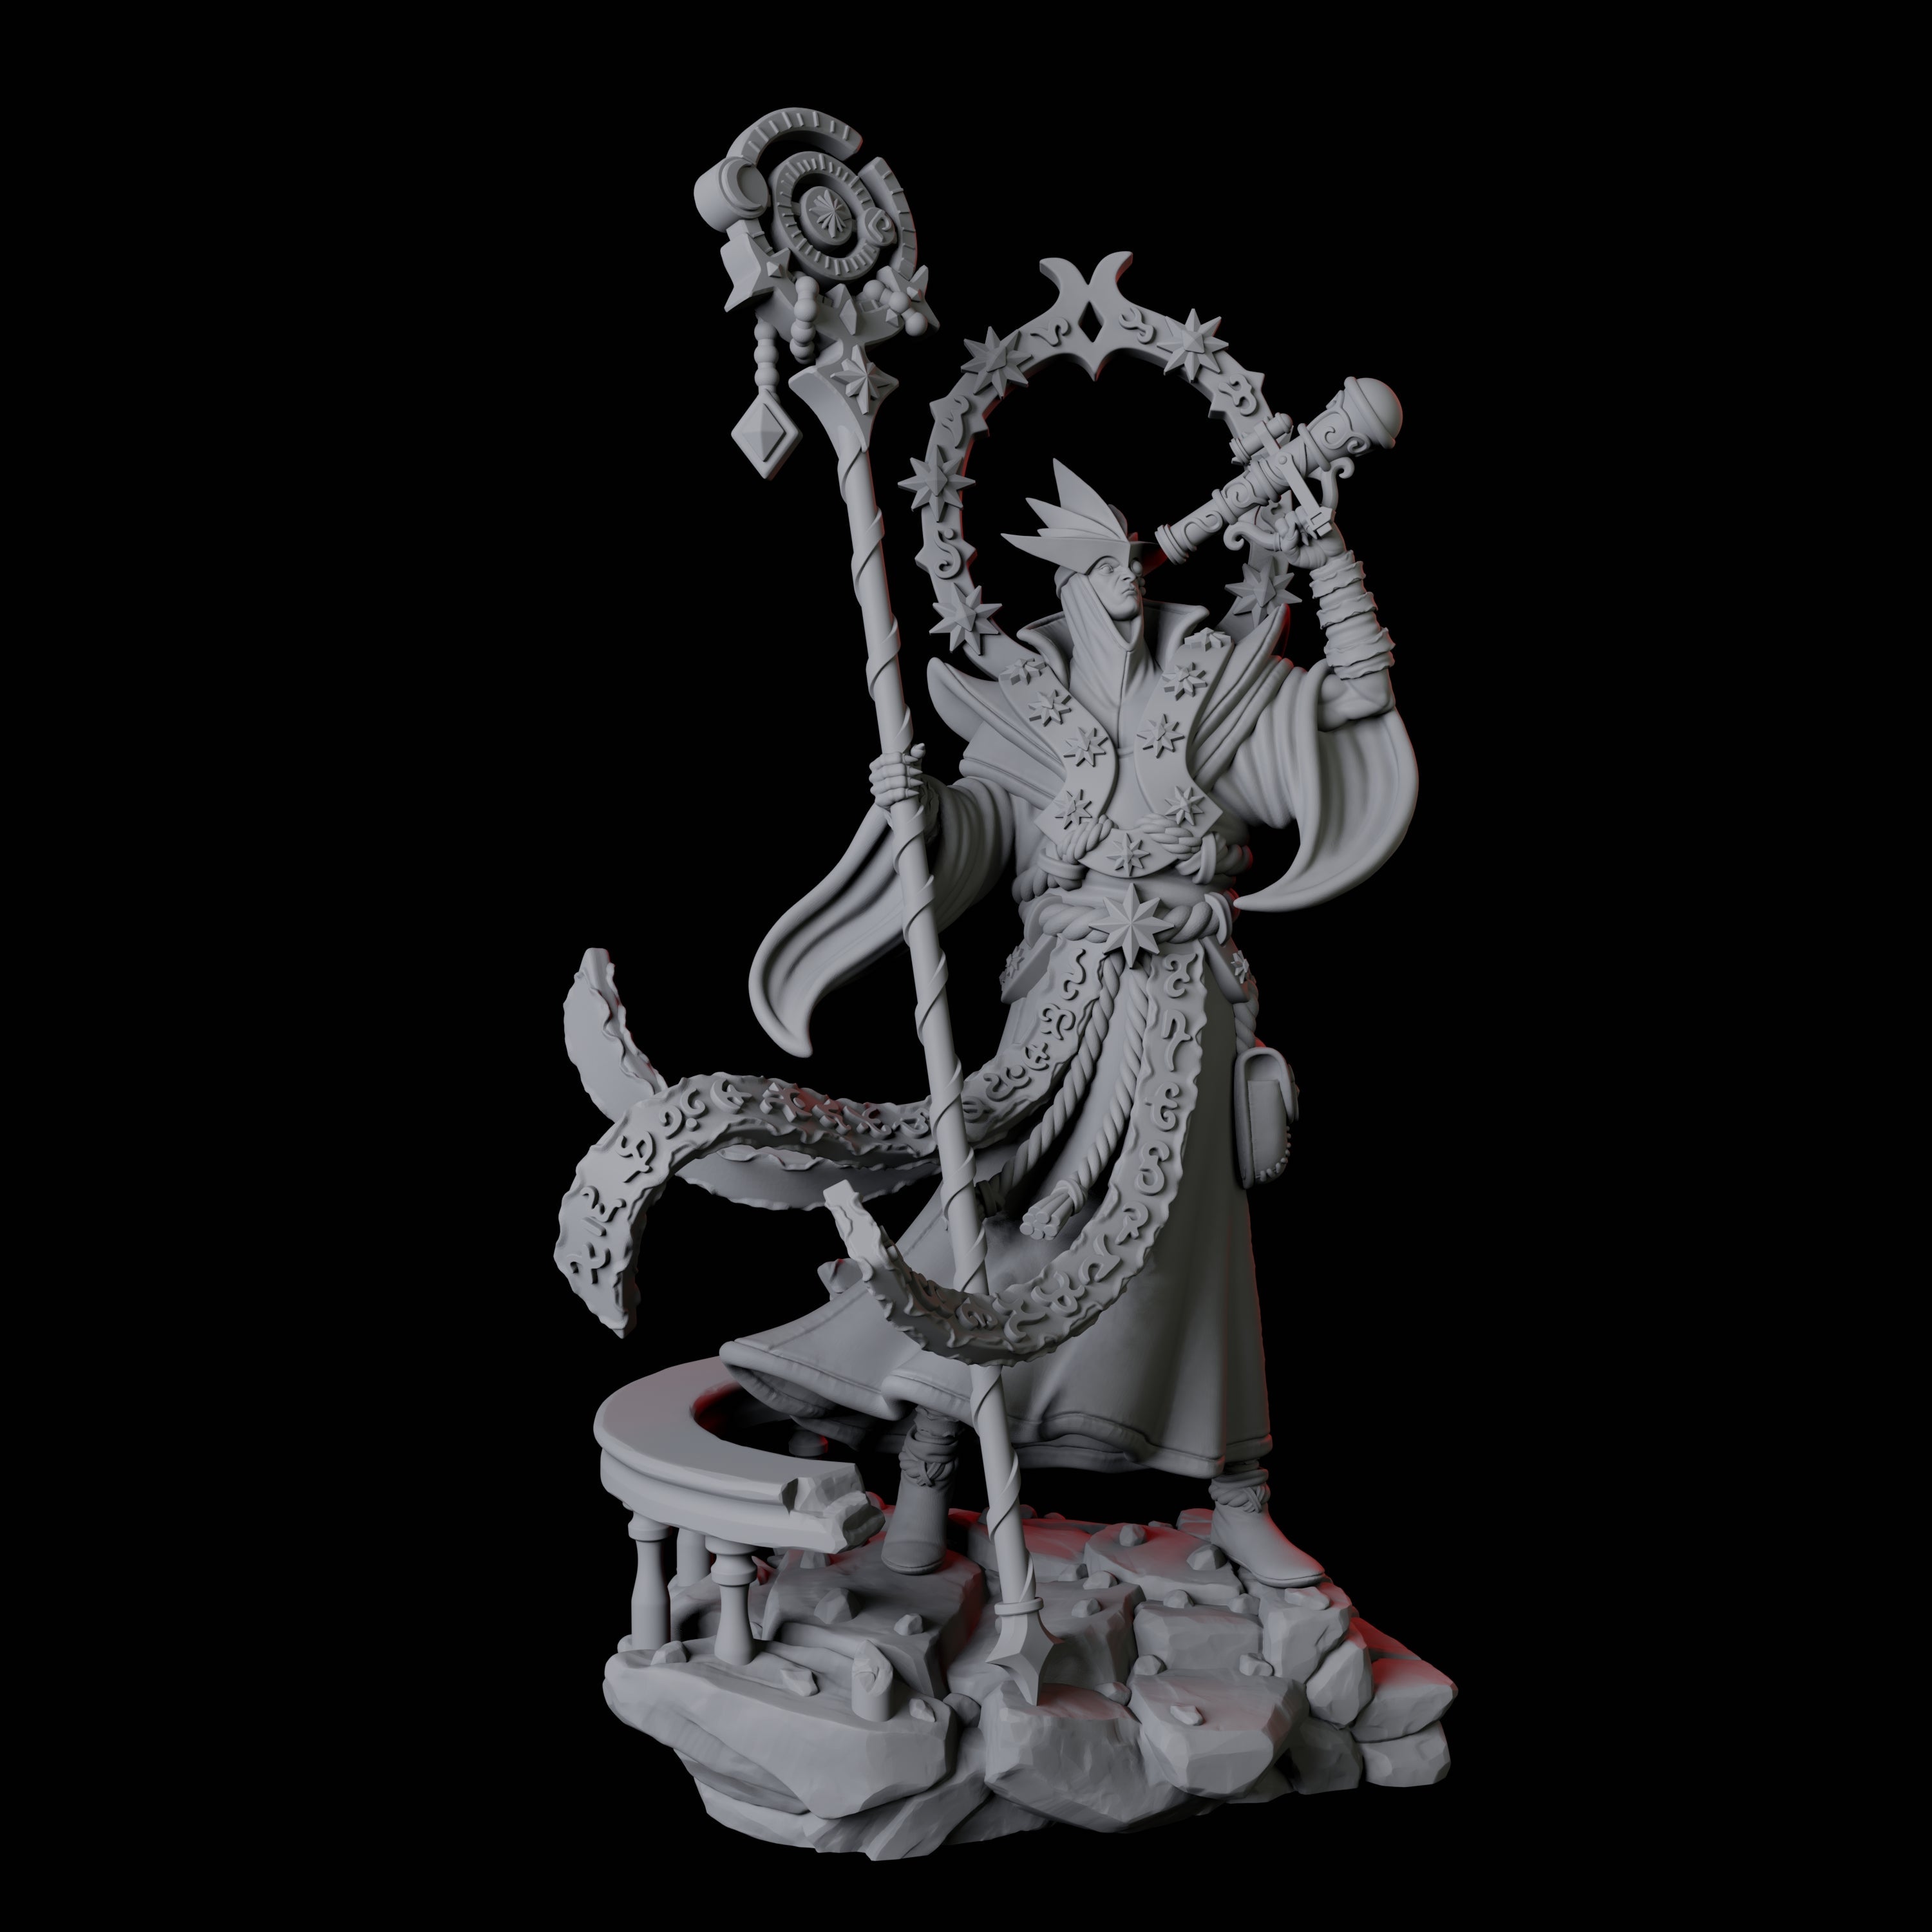 Ornate Astronomer Miniature for Dungeons and Dragons, Pathfinder or other TTRPGs